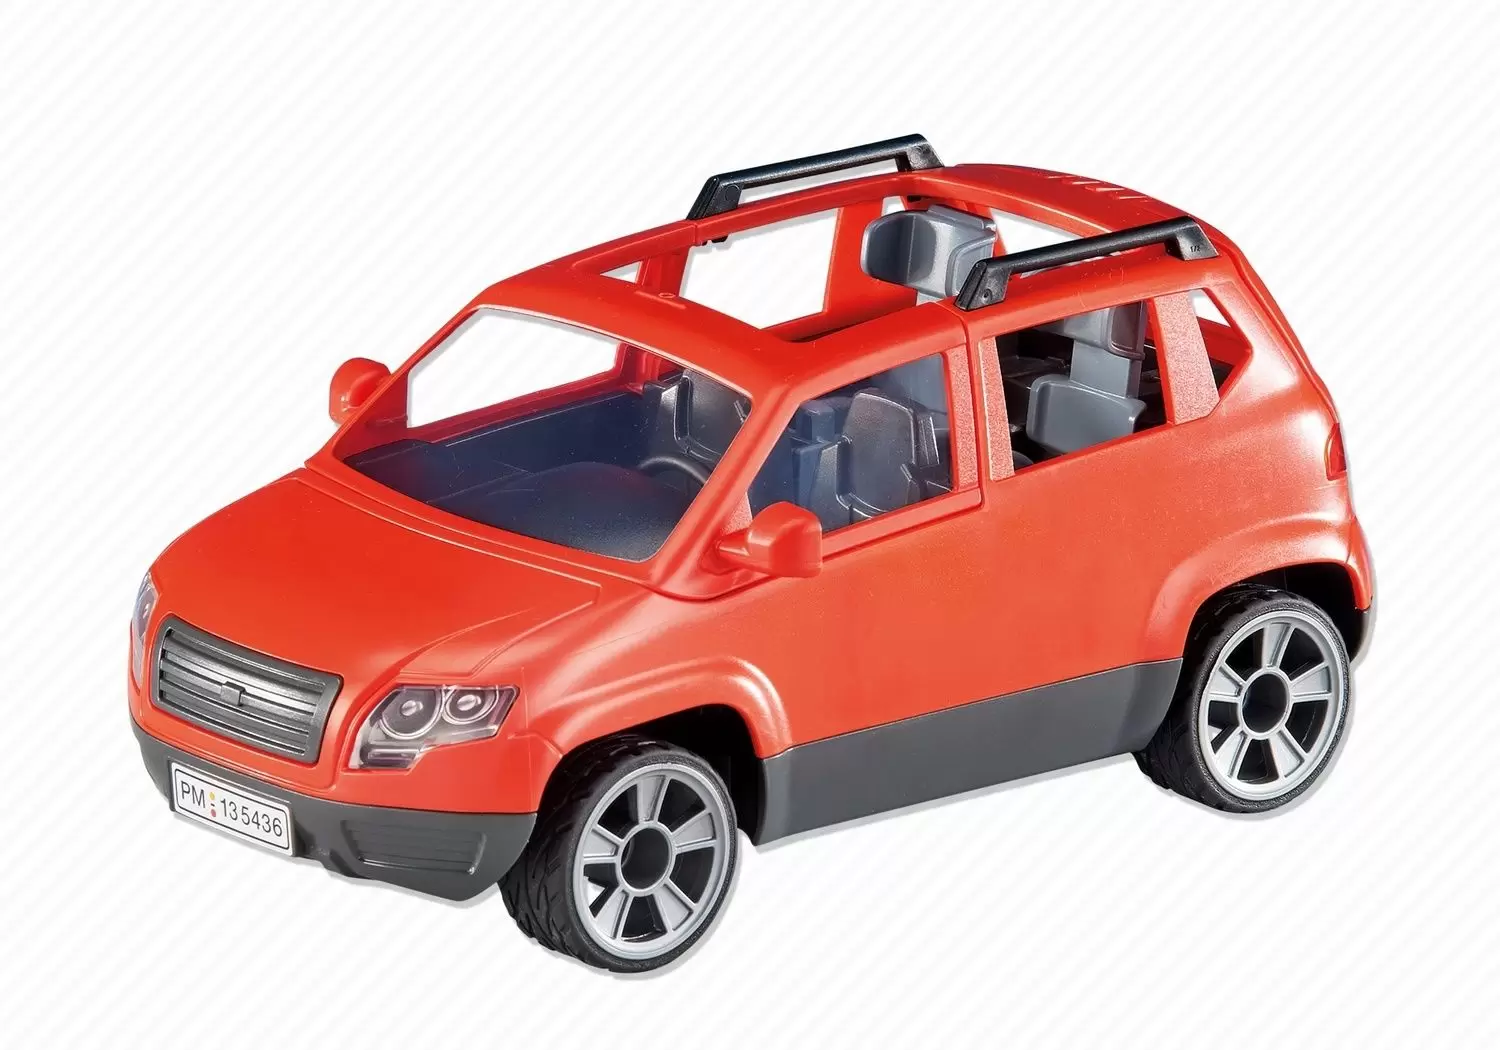 Playmobil on Hollidays - Red family car